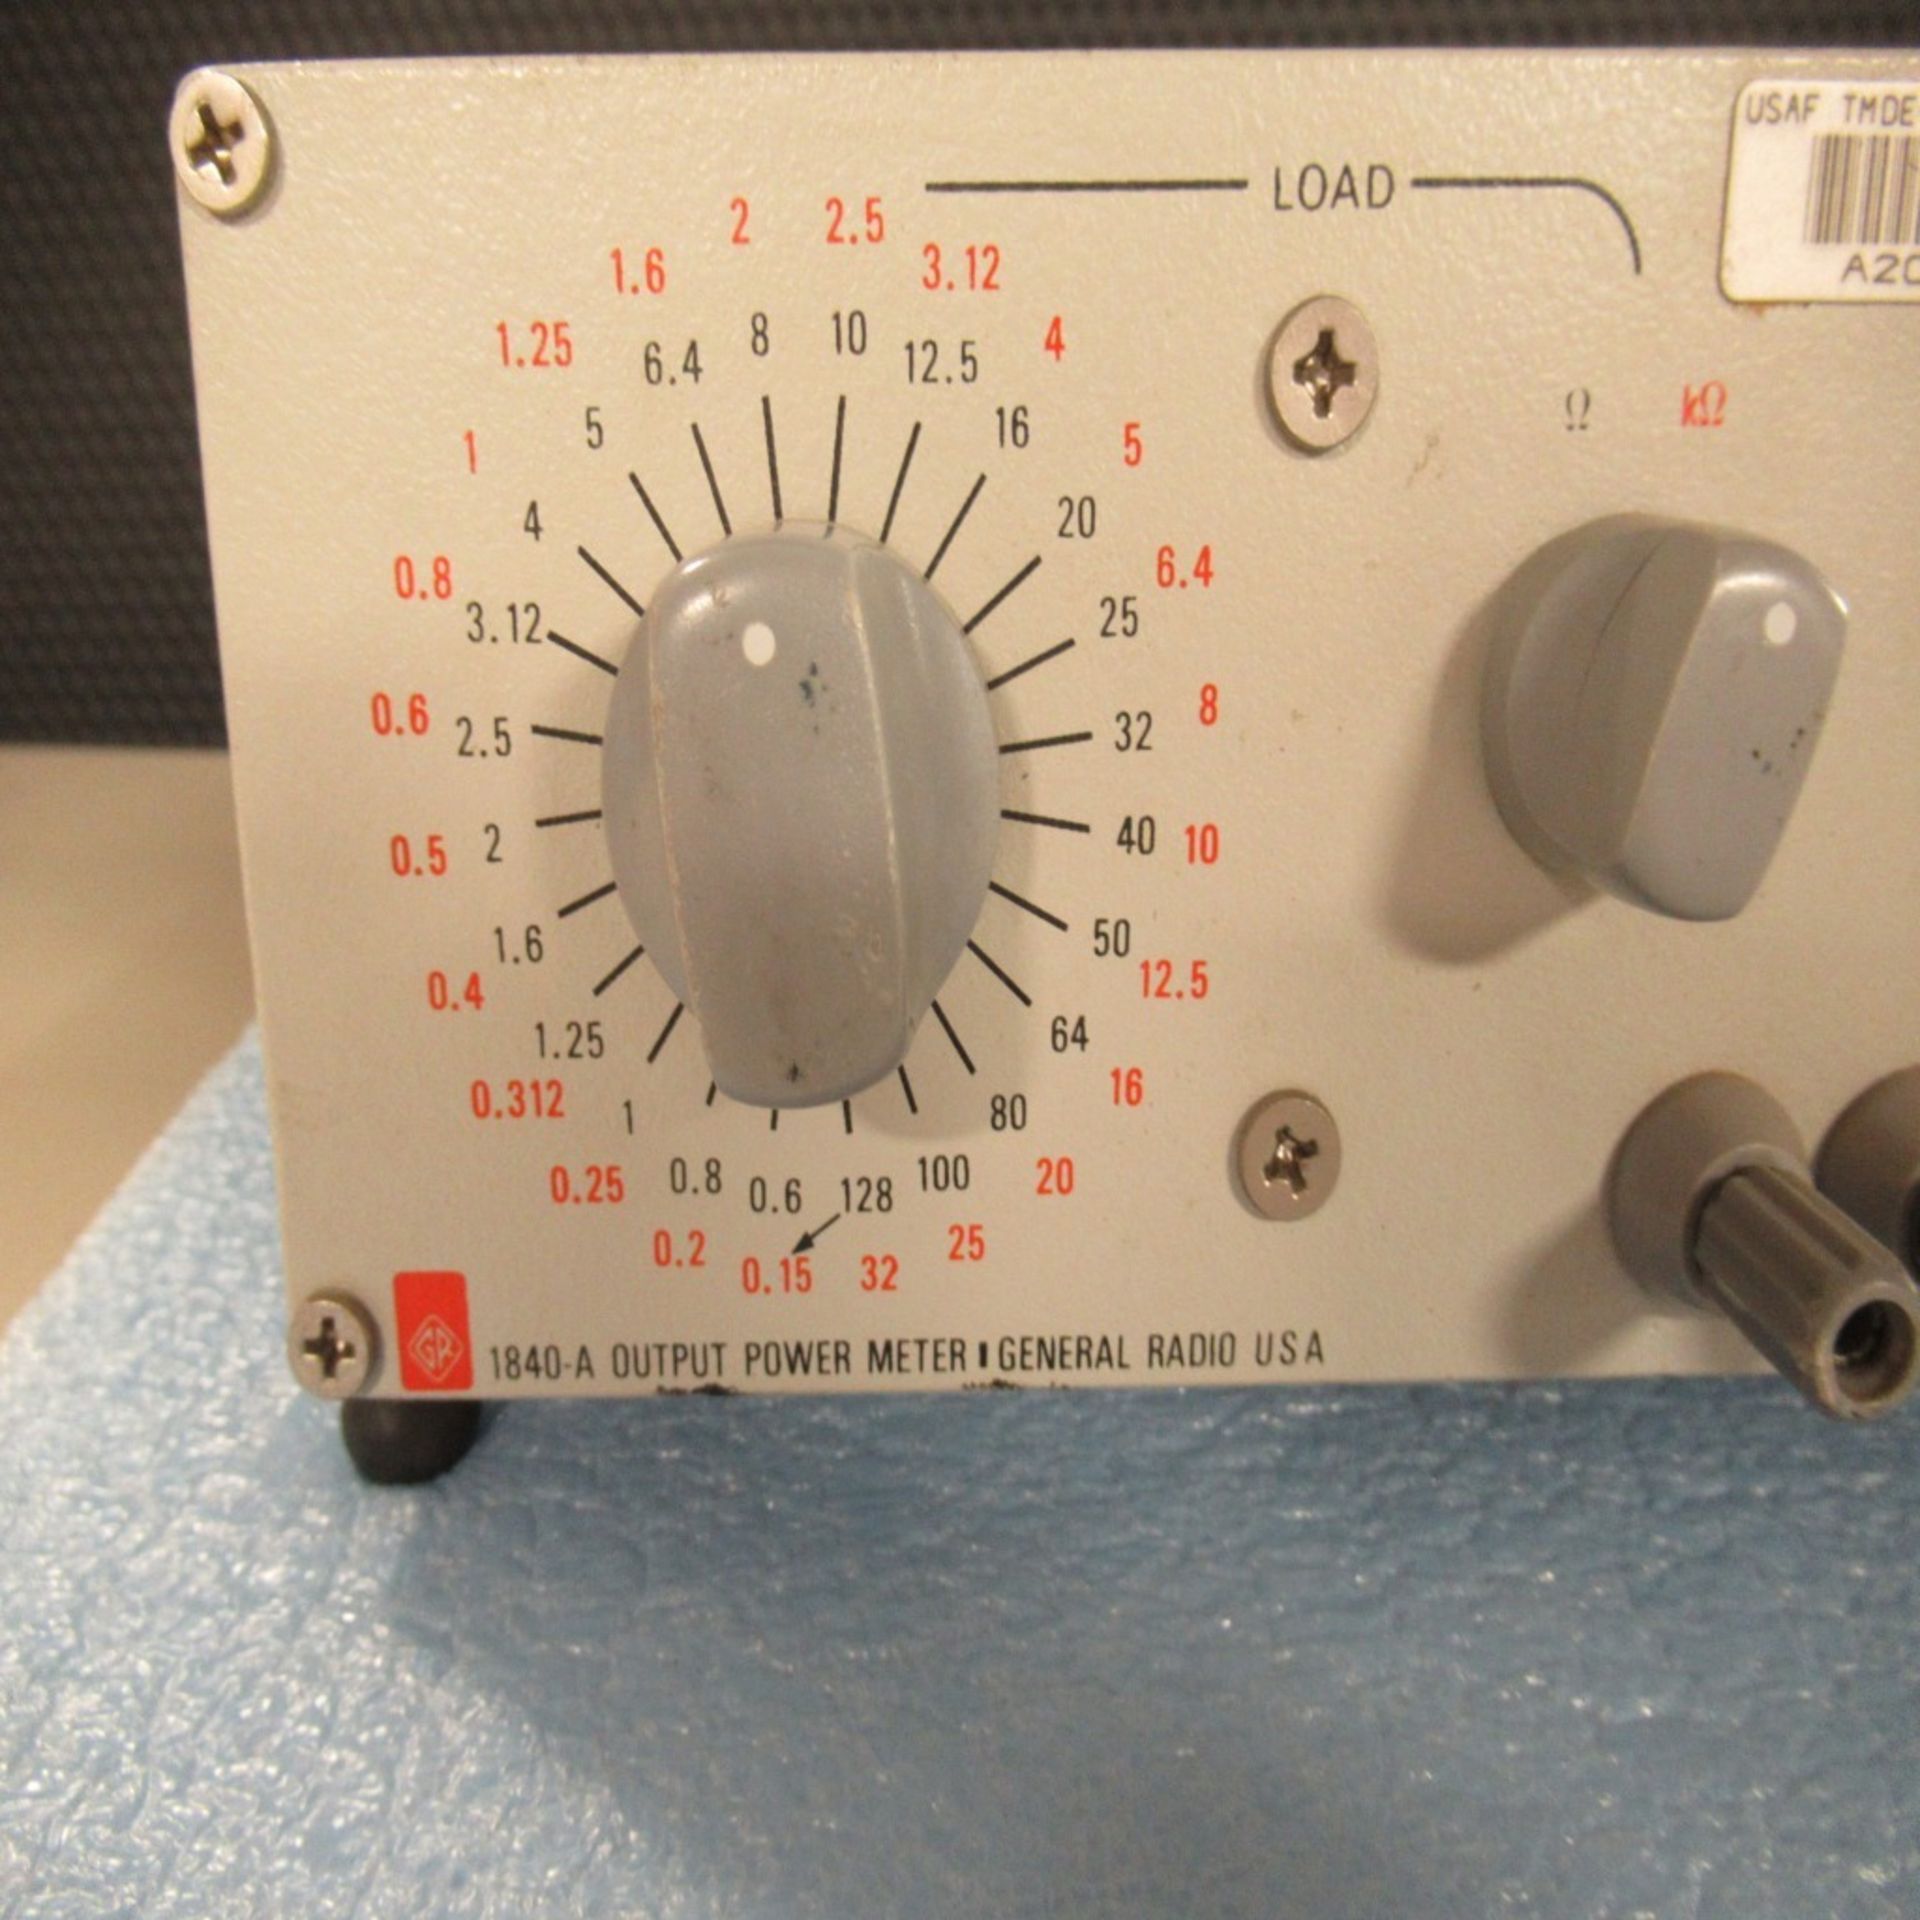 PHOTON SNAP SHOT MODEL 6000 *POWERS ON* NO SCREEN DISPLAY; FARNELL AP20-80 REGULATED POWER SUPPLY * - Image 216 of 222